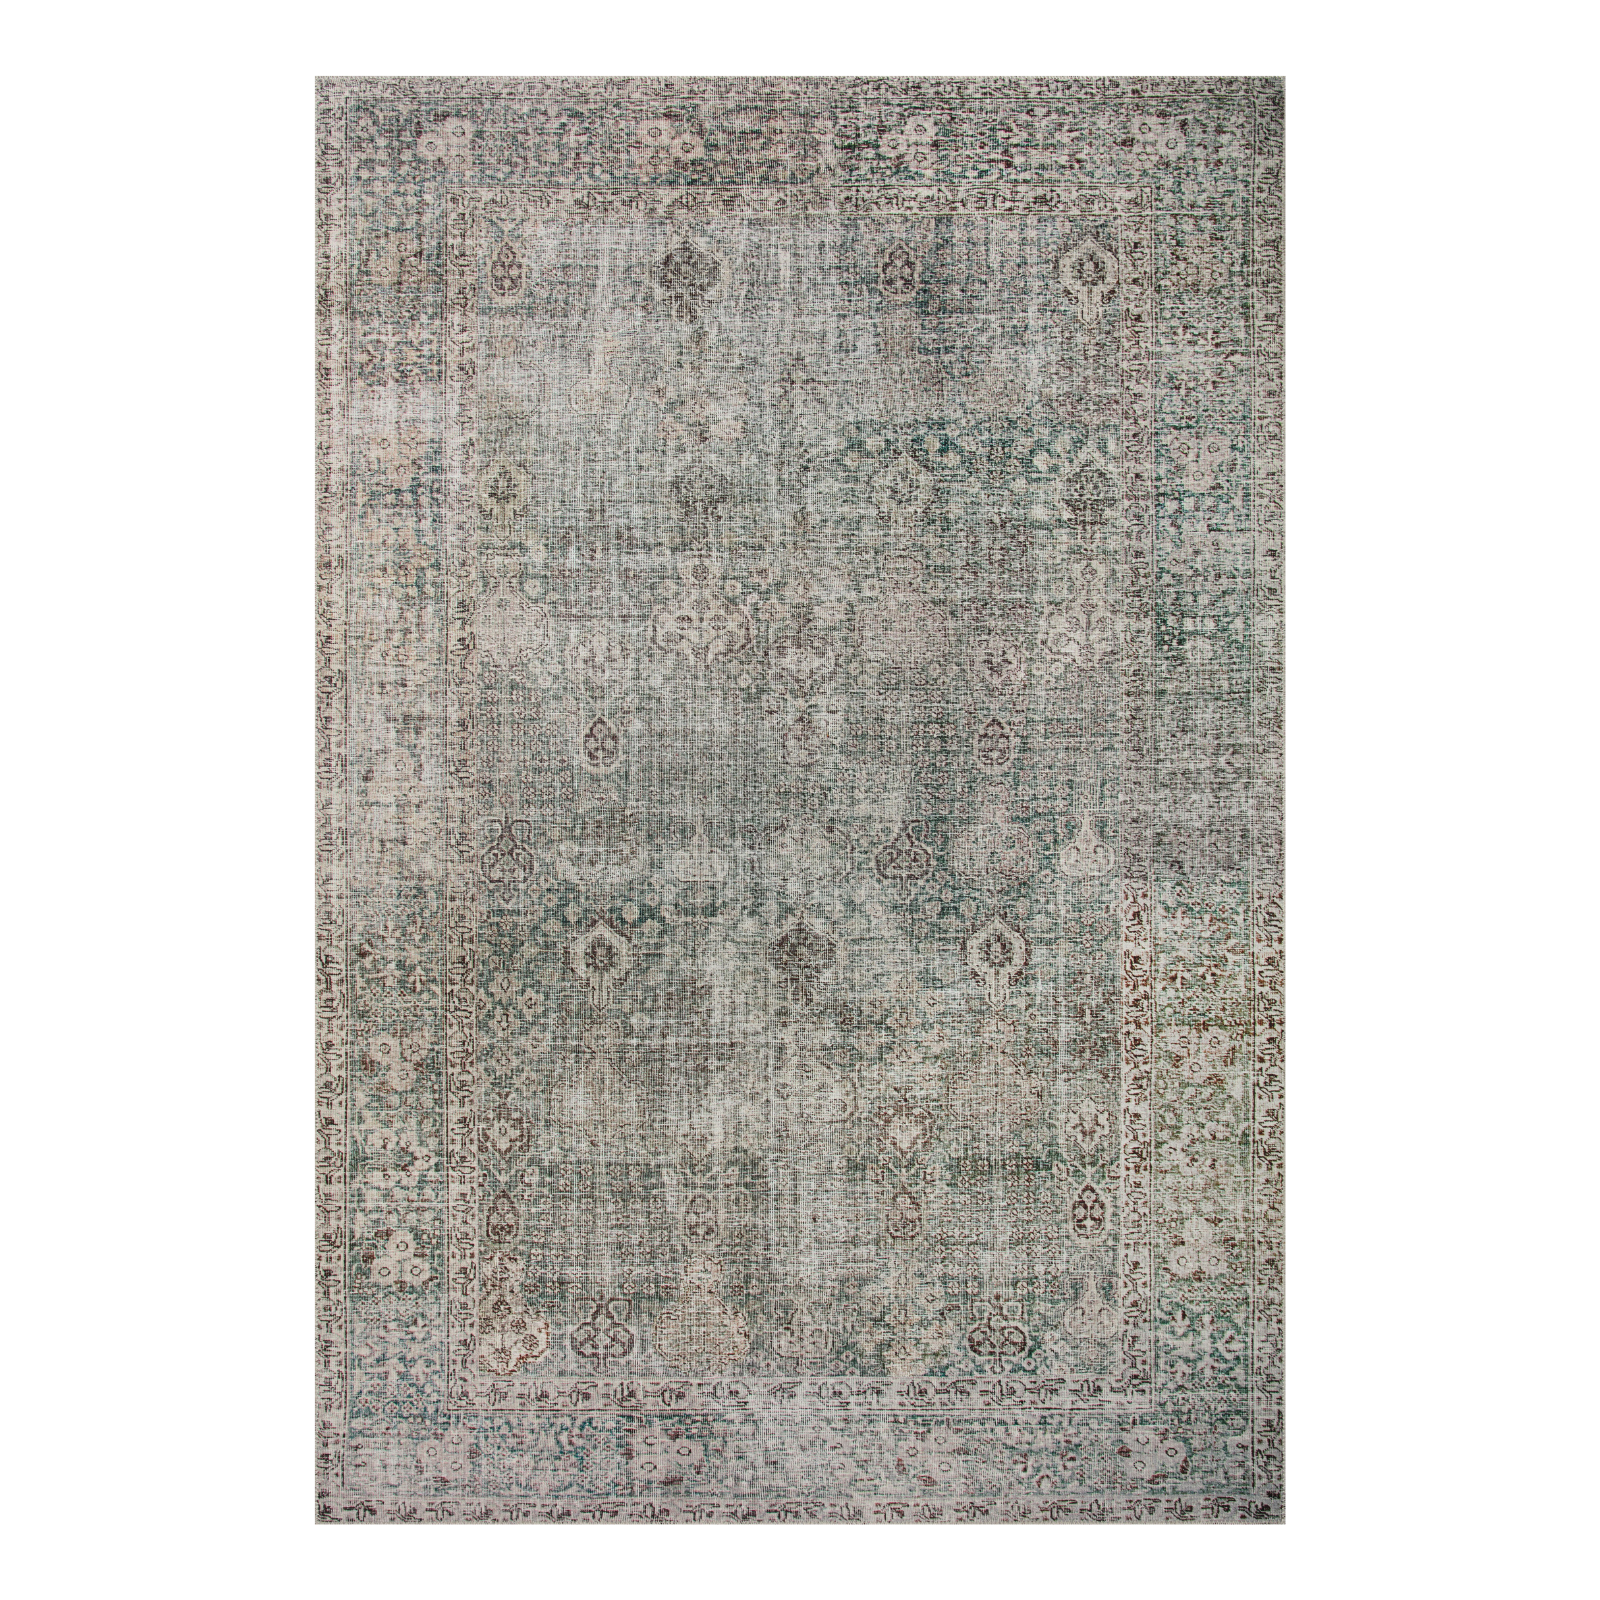 OVERSTOCK RUG - Loloi Jules Emerald / Antique Ivory - 2'3" x 3'9"